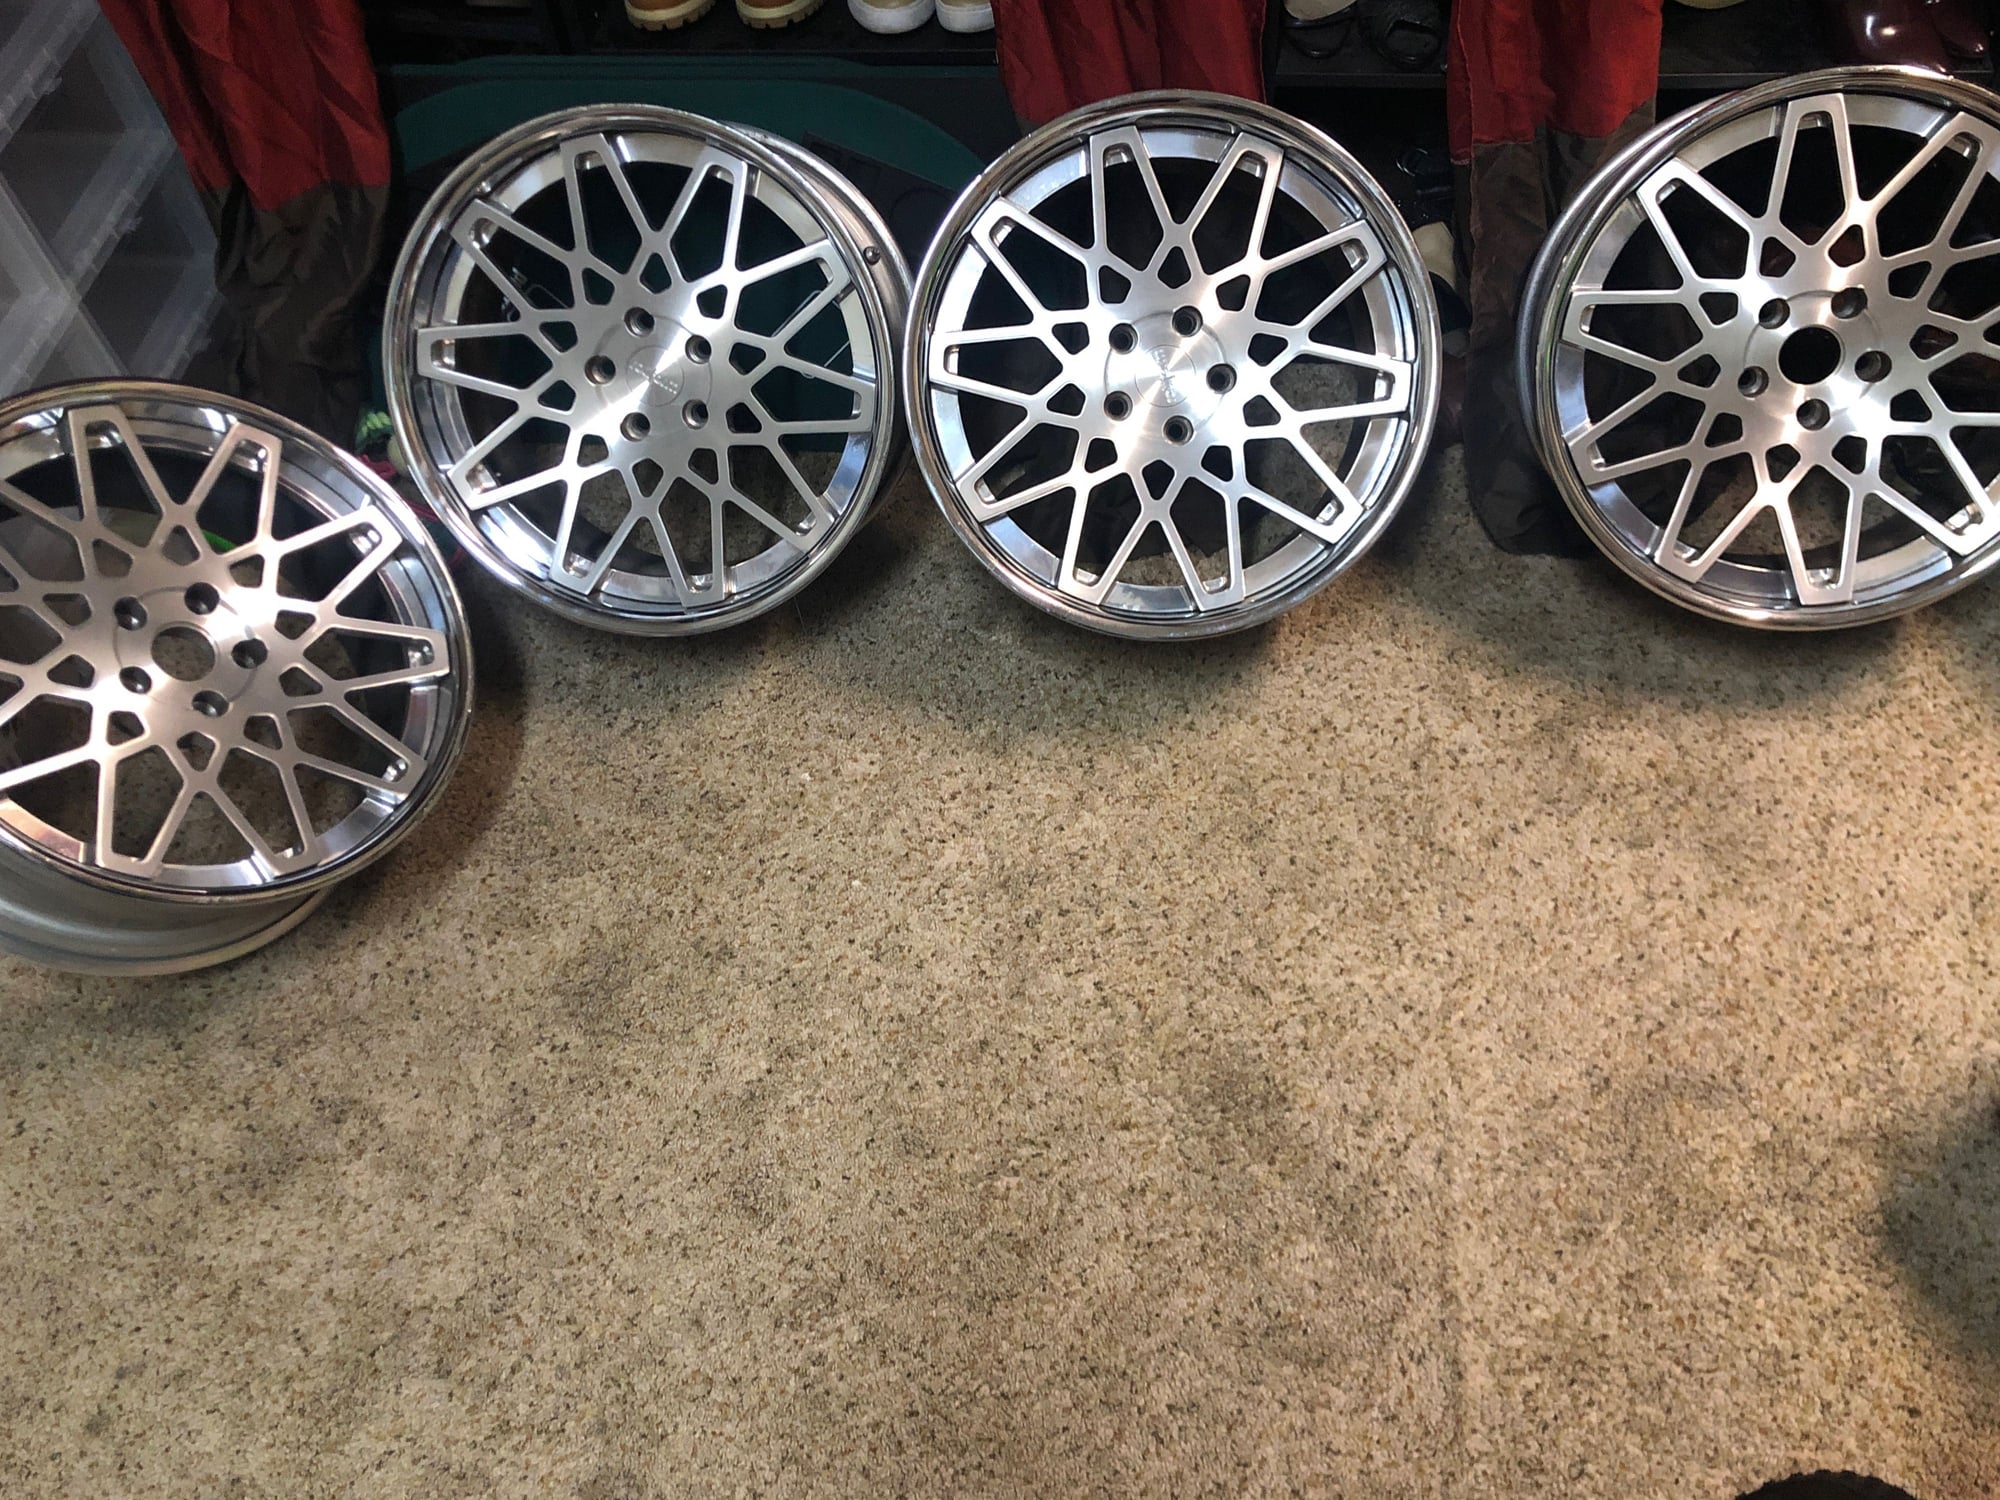 Wheels and Tires/Axles - *Rare* 19" Rotiform BLQ 3-Piece Forged Staggered Wheels with NEW Michelins - Used - 2000 to 2020 Mercedes-Benz All Models - 2000 to 2020 Audi All Models - 2000 to 2020 BMW All Models - 2000 to 2020 Volkswagen All Models - San Jose, CA 95125, United States